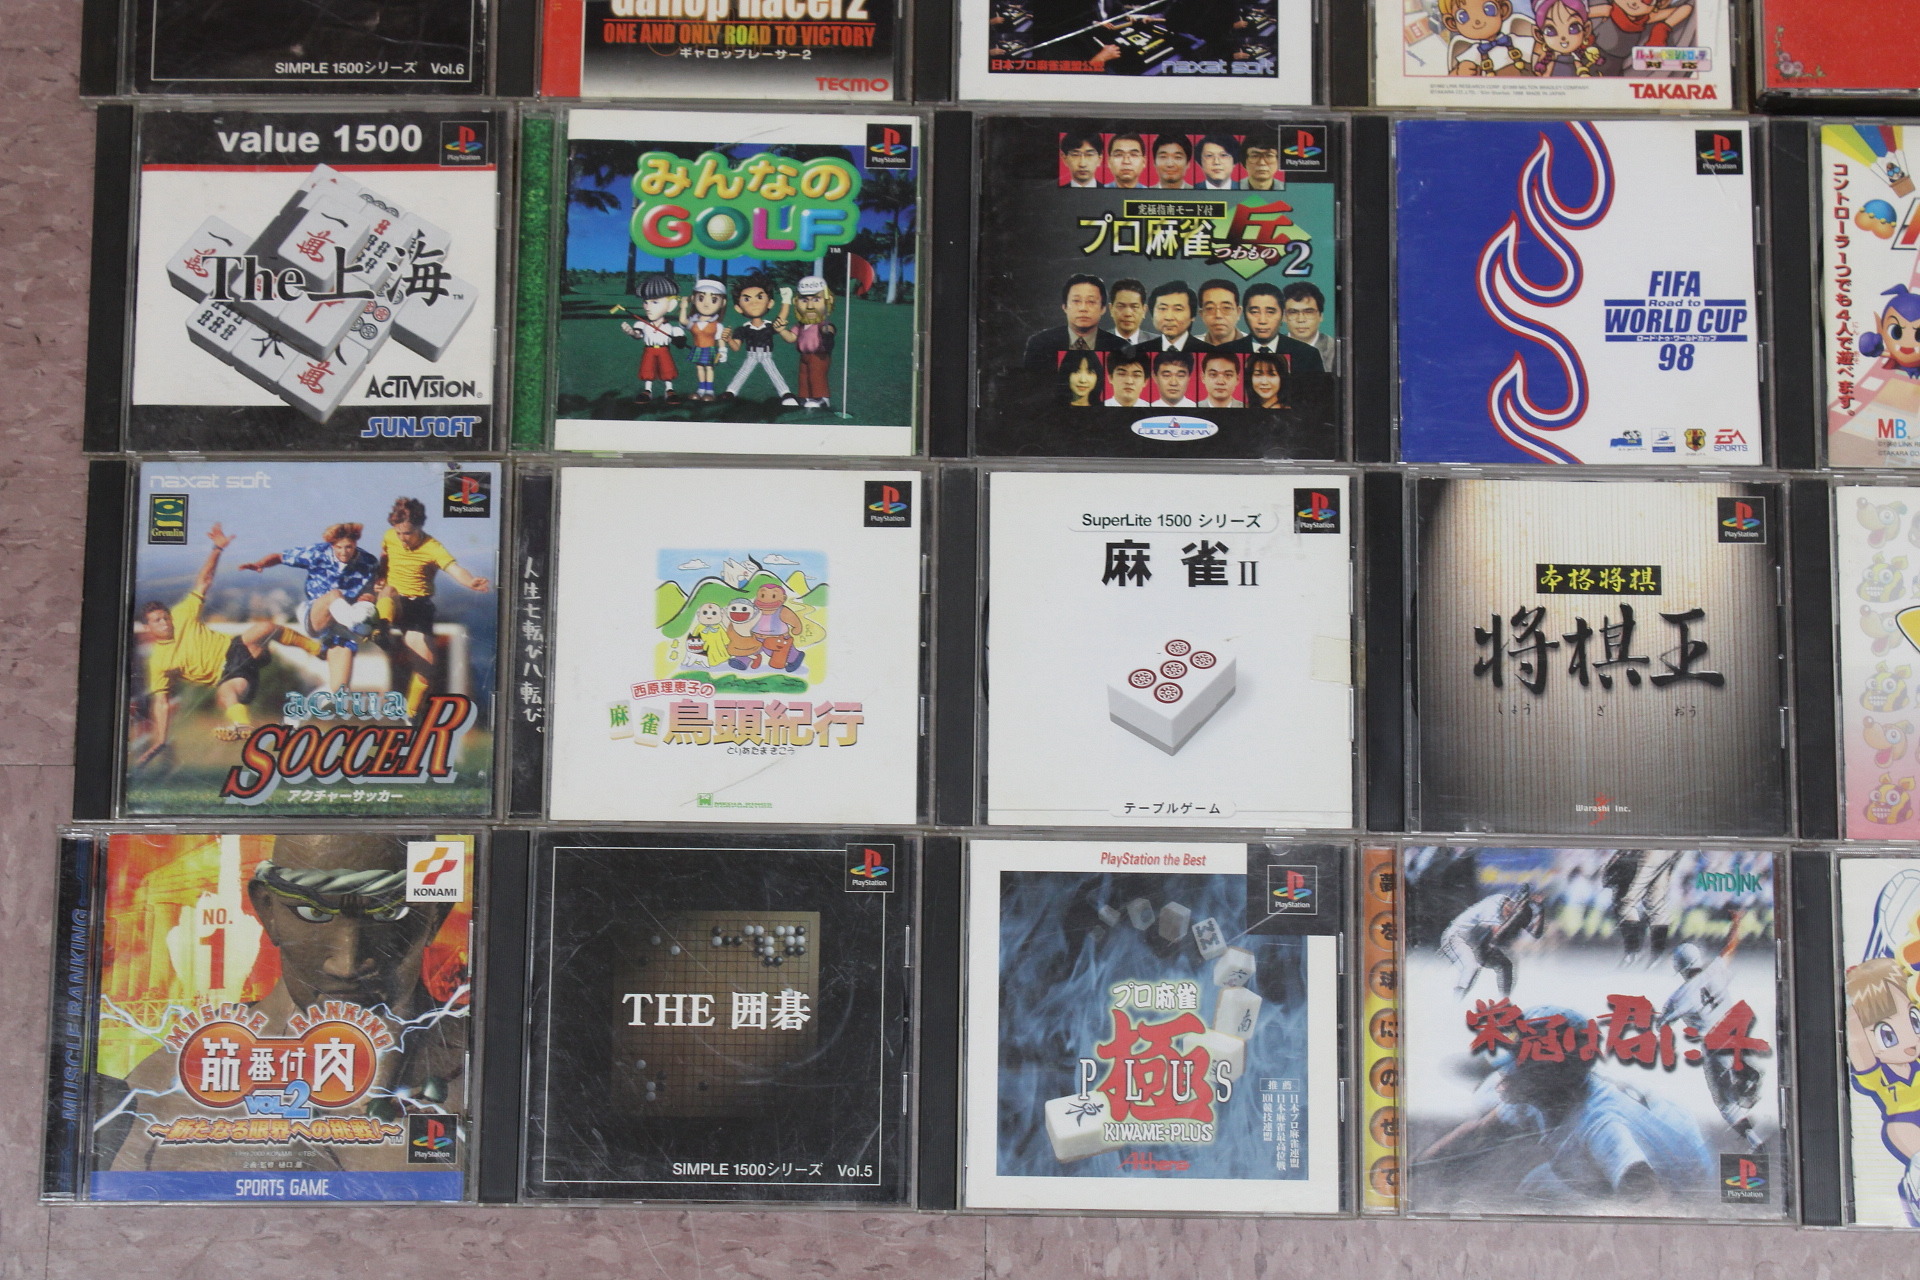 Wholesale Lot of 48 PS1 PlayStation 1 Games (Untested)